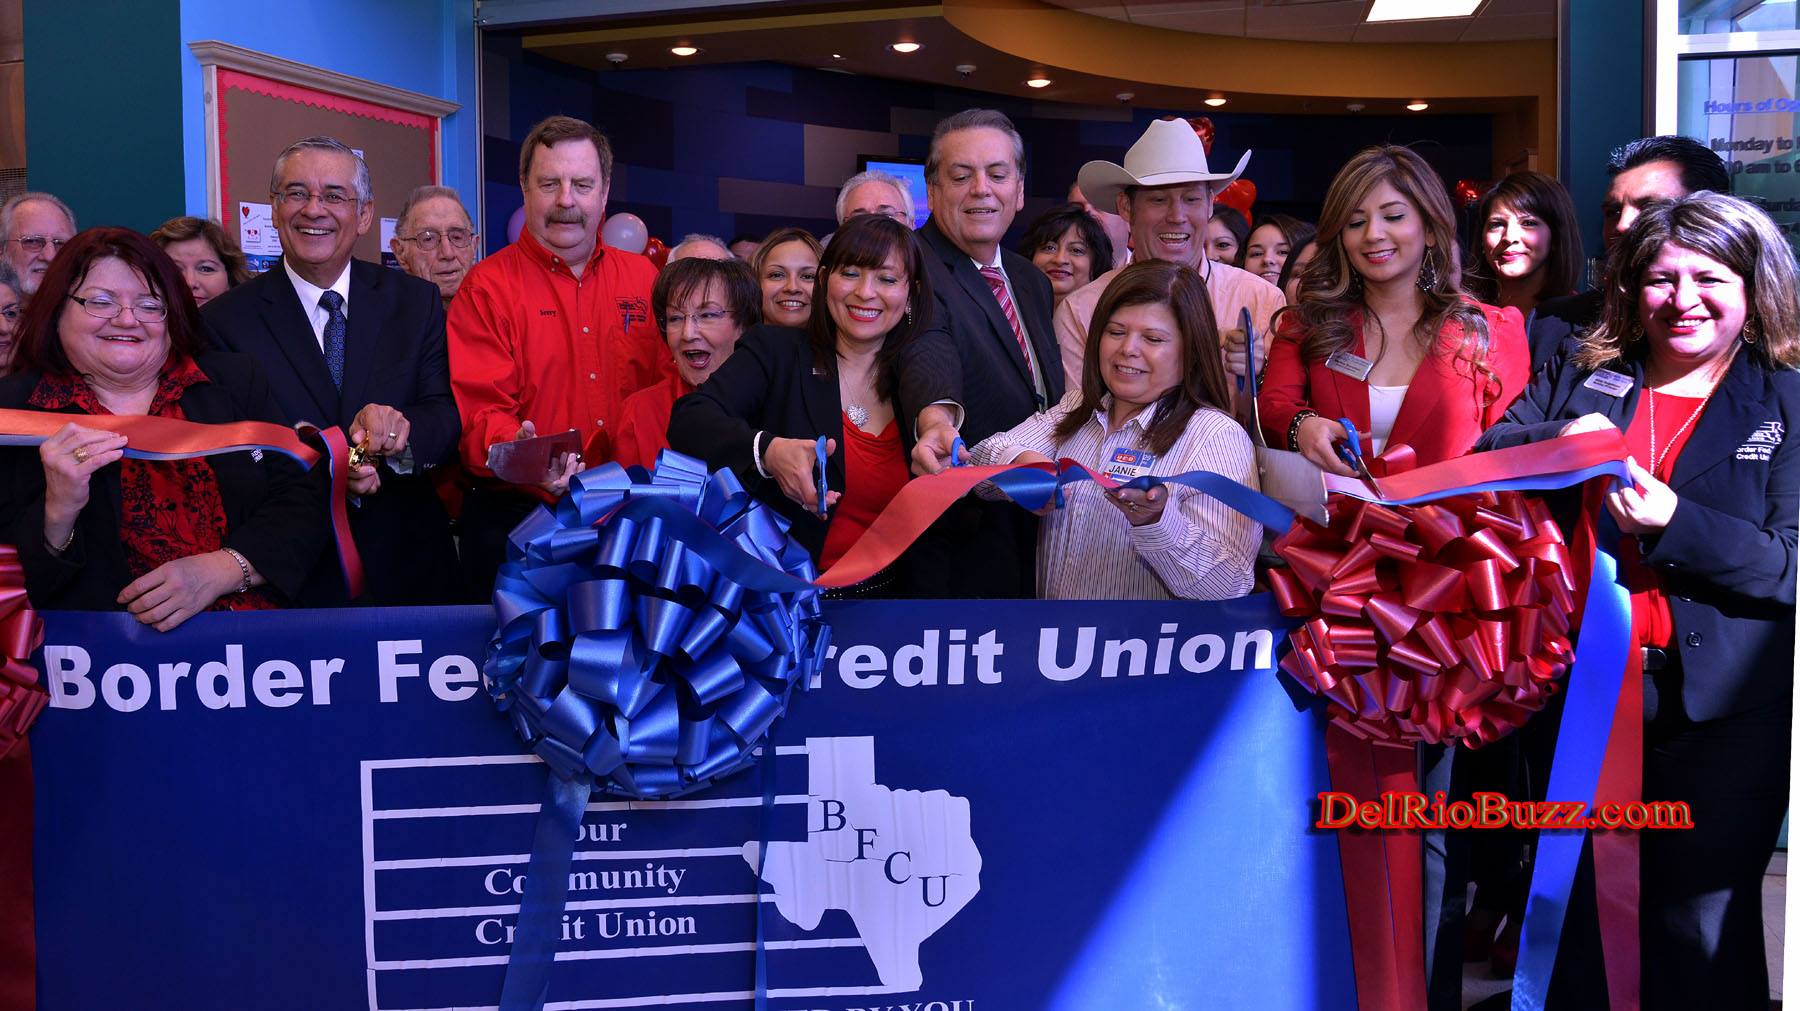  Border Federal Credit Union Ribbon Cutting today at HEB